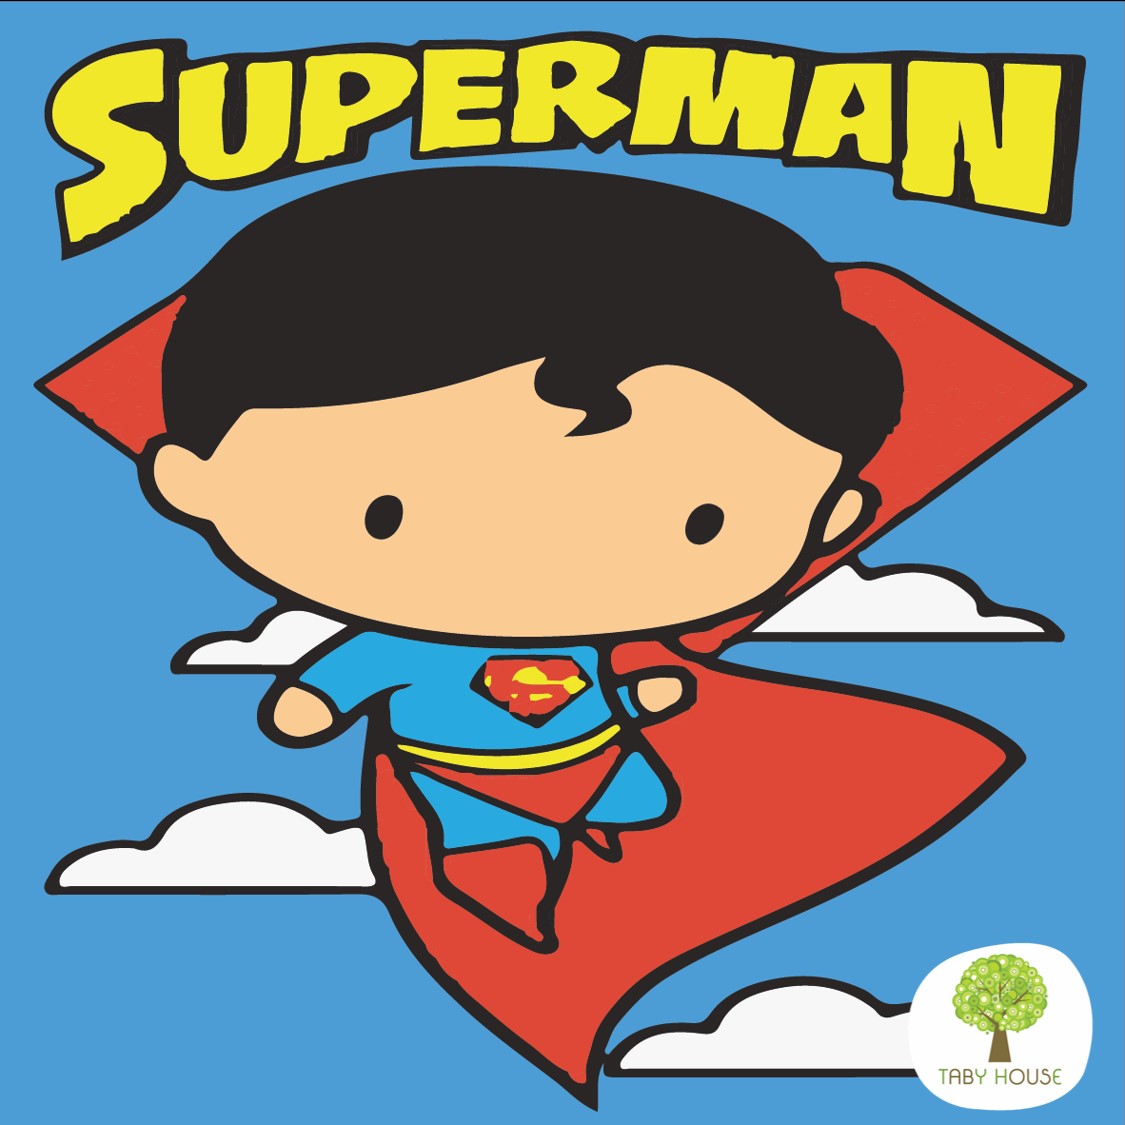 N02020029 Superman Superhero Series Small Size Number Painting (20x20cm)